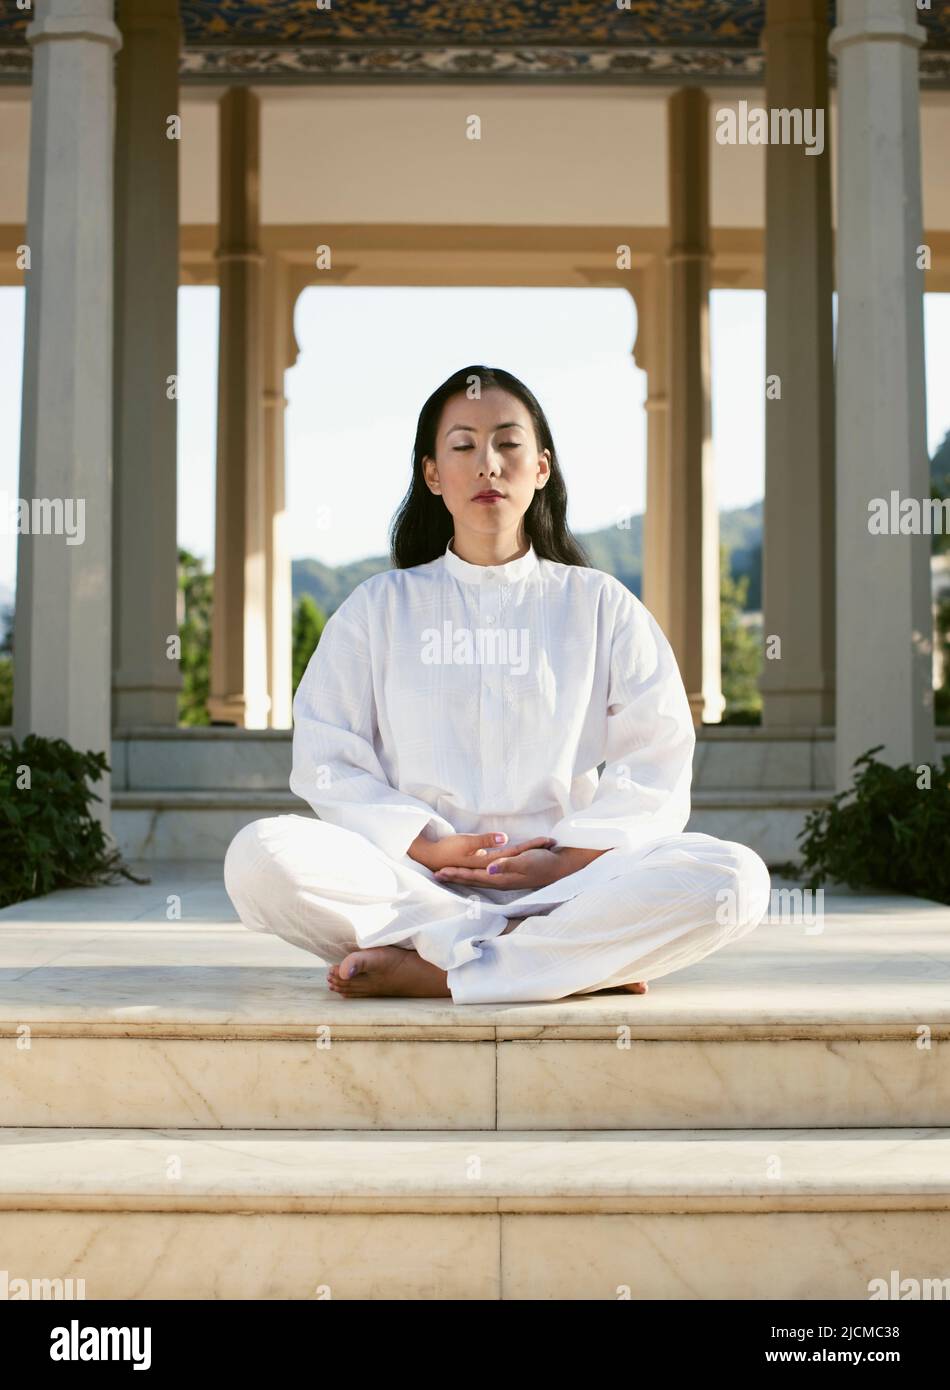 A young woman practices early morning meditation. Stock Photo